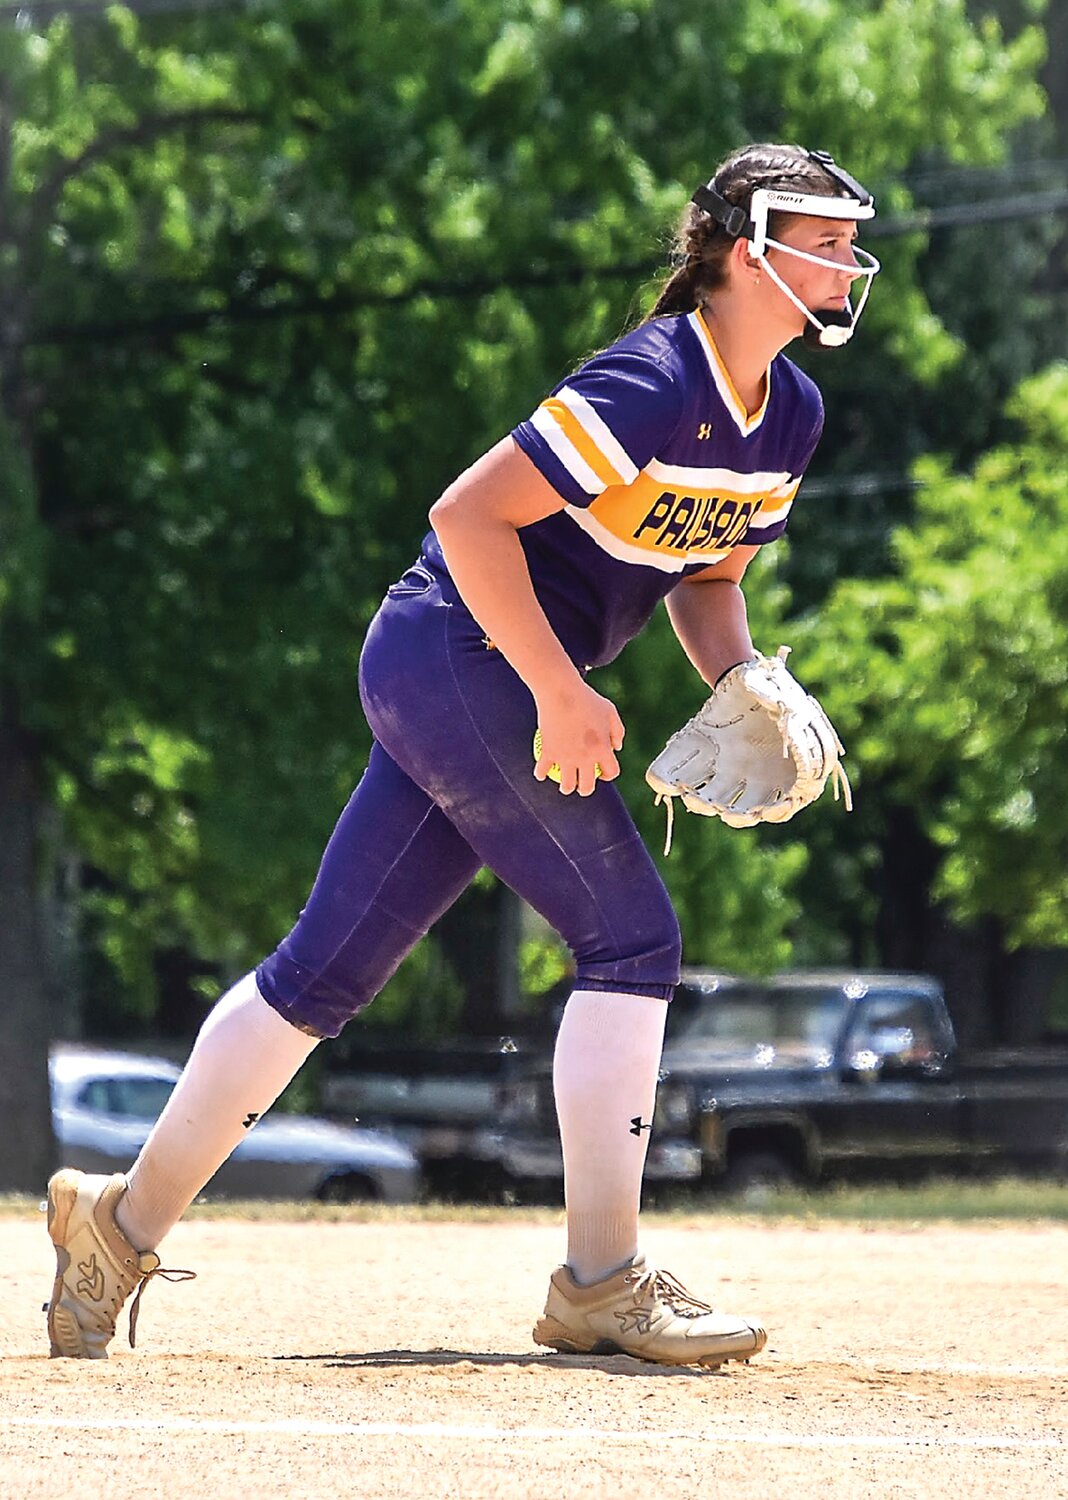 Palisades junior Karlye Teman struck out 288 batters and posted seven shutouts in her sophomore season. Teman and the rest of the Pirates open the season against Bangor on Thursday.